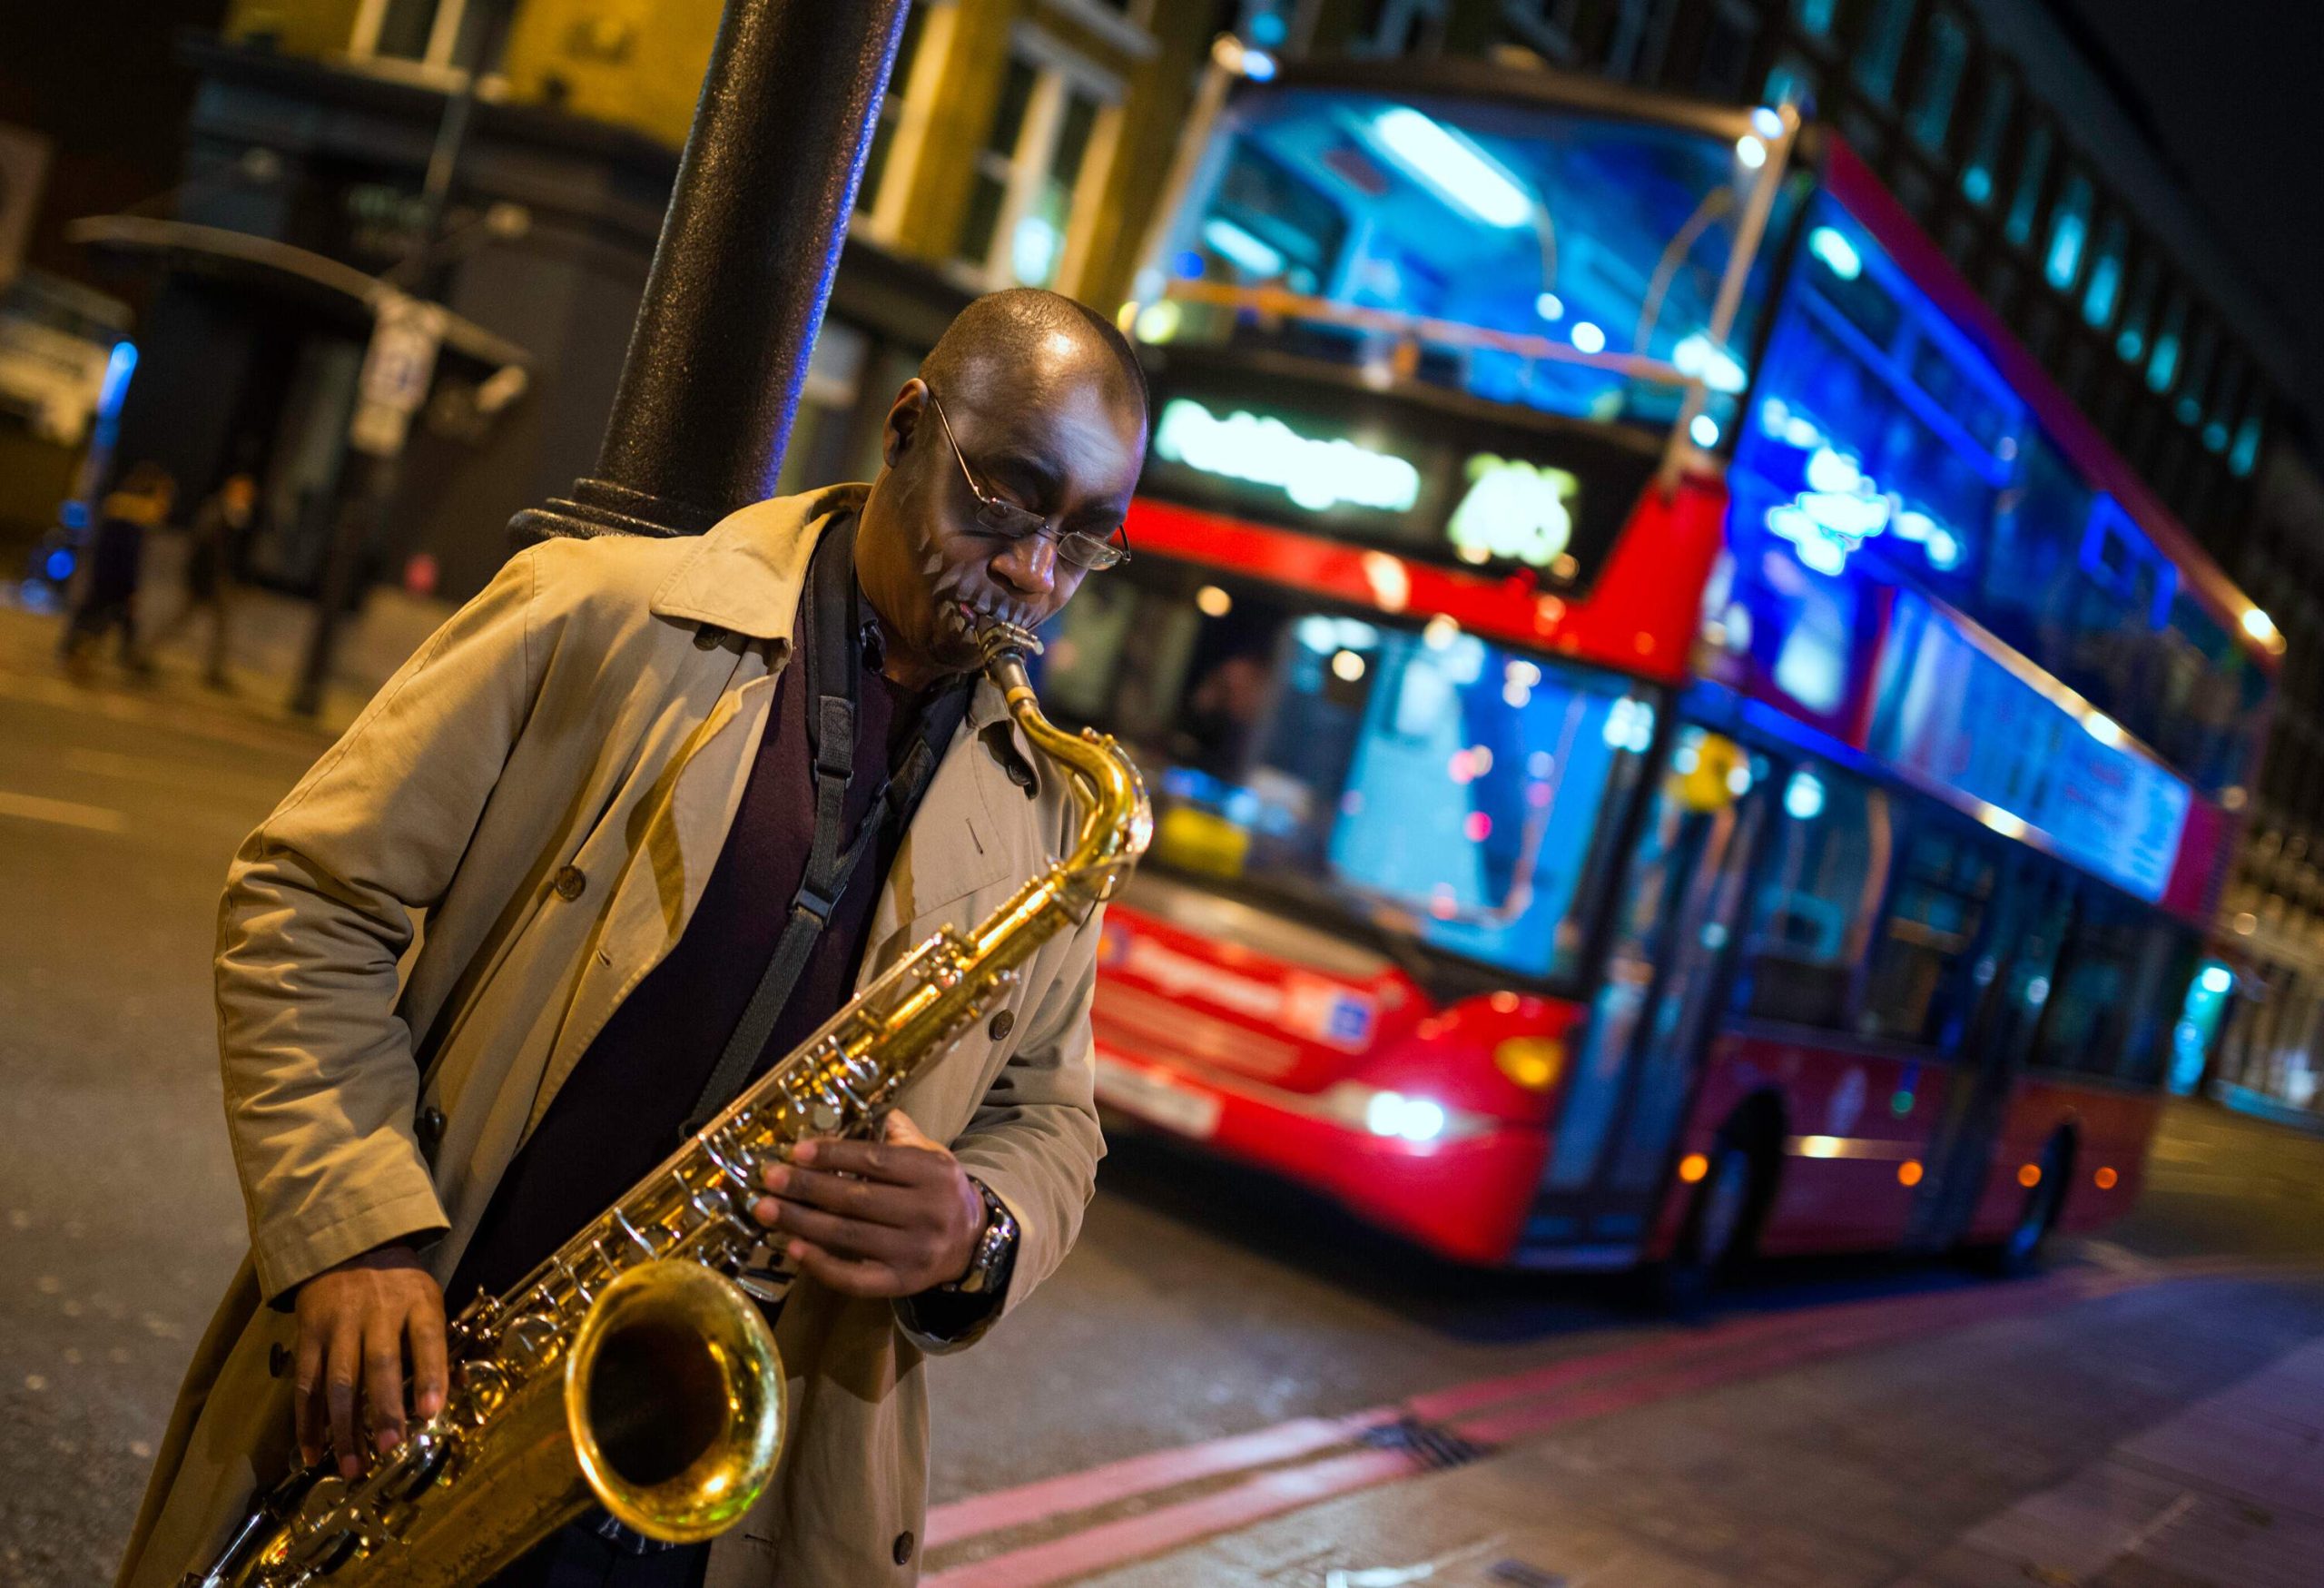 Black Street Musician in London, UK,  playing on saxophone in the evening,